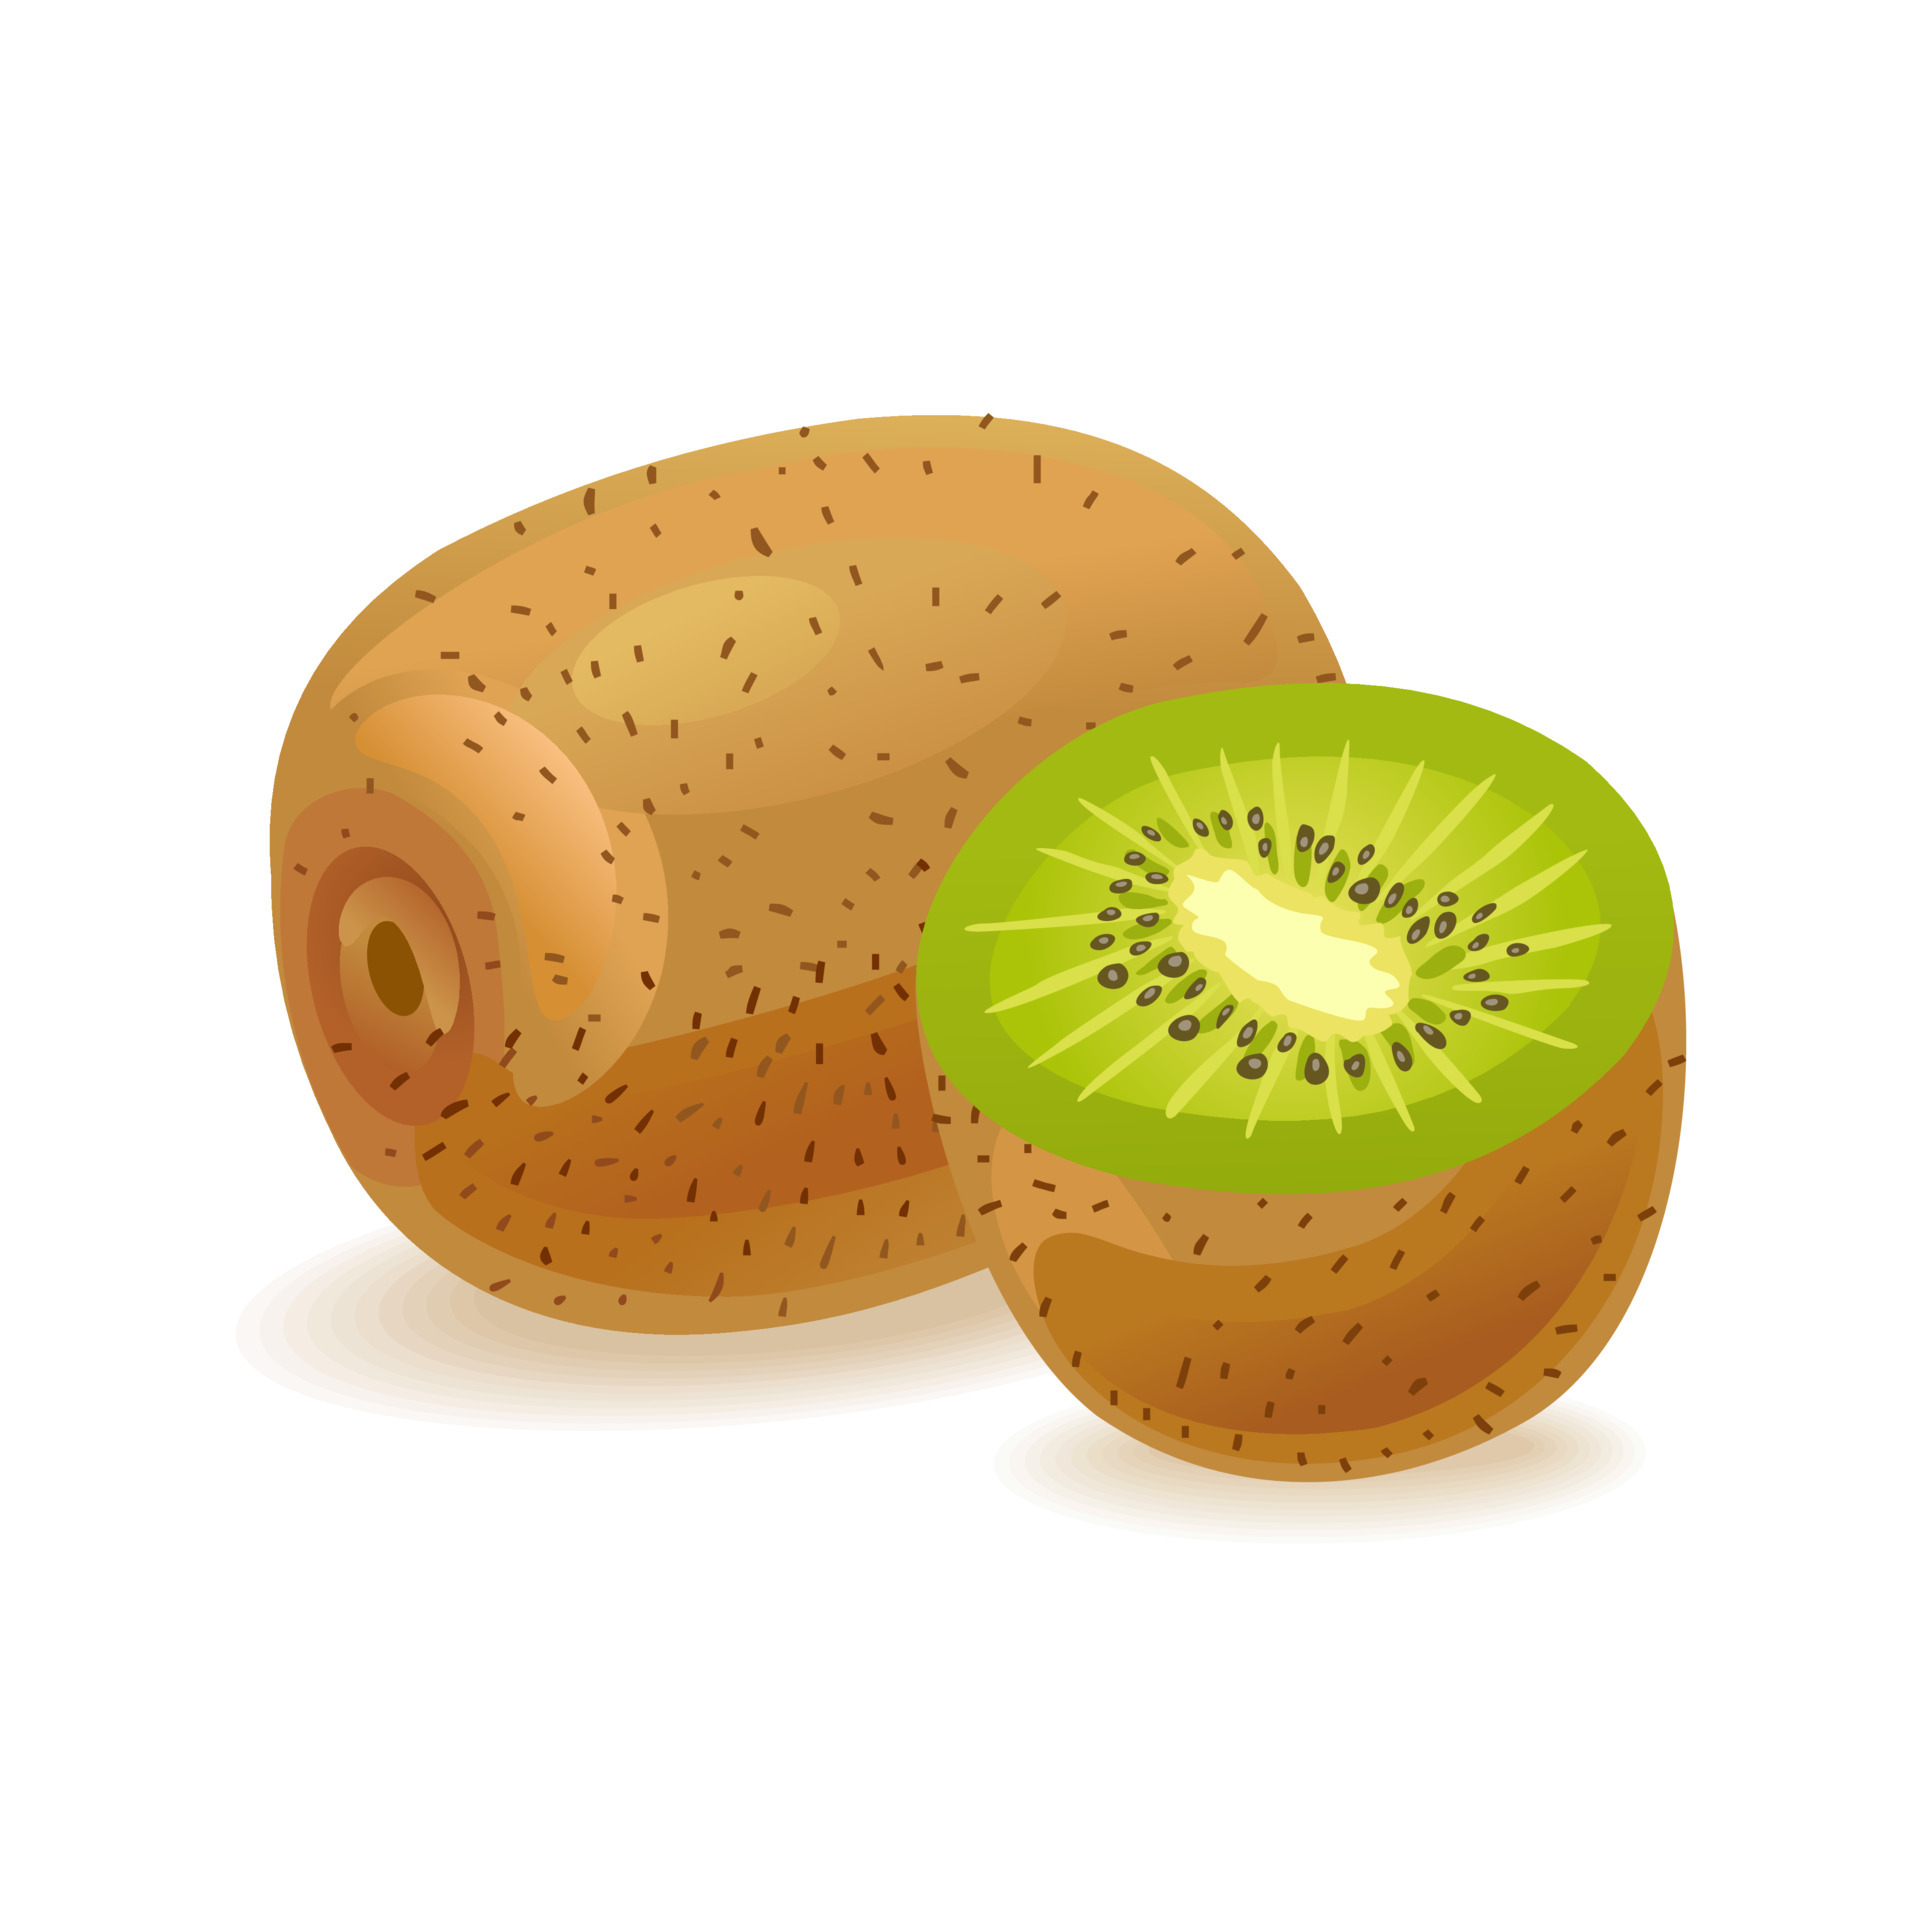 https://static.vecteezy.com/system/resources/previews/005/461/269/original/realistic-kiwi-fruit-half-and-slice-fresh-organic-food-for-a-healthy-diet-tropical-berry-for-dessert-illustration-free-vector.jpg